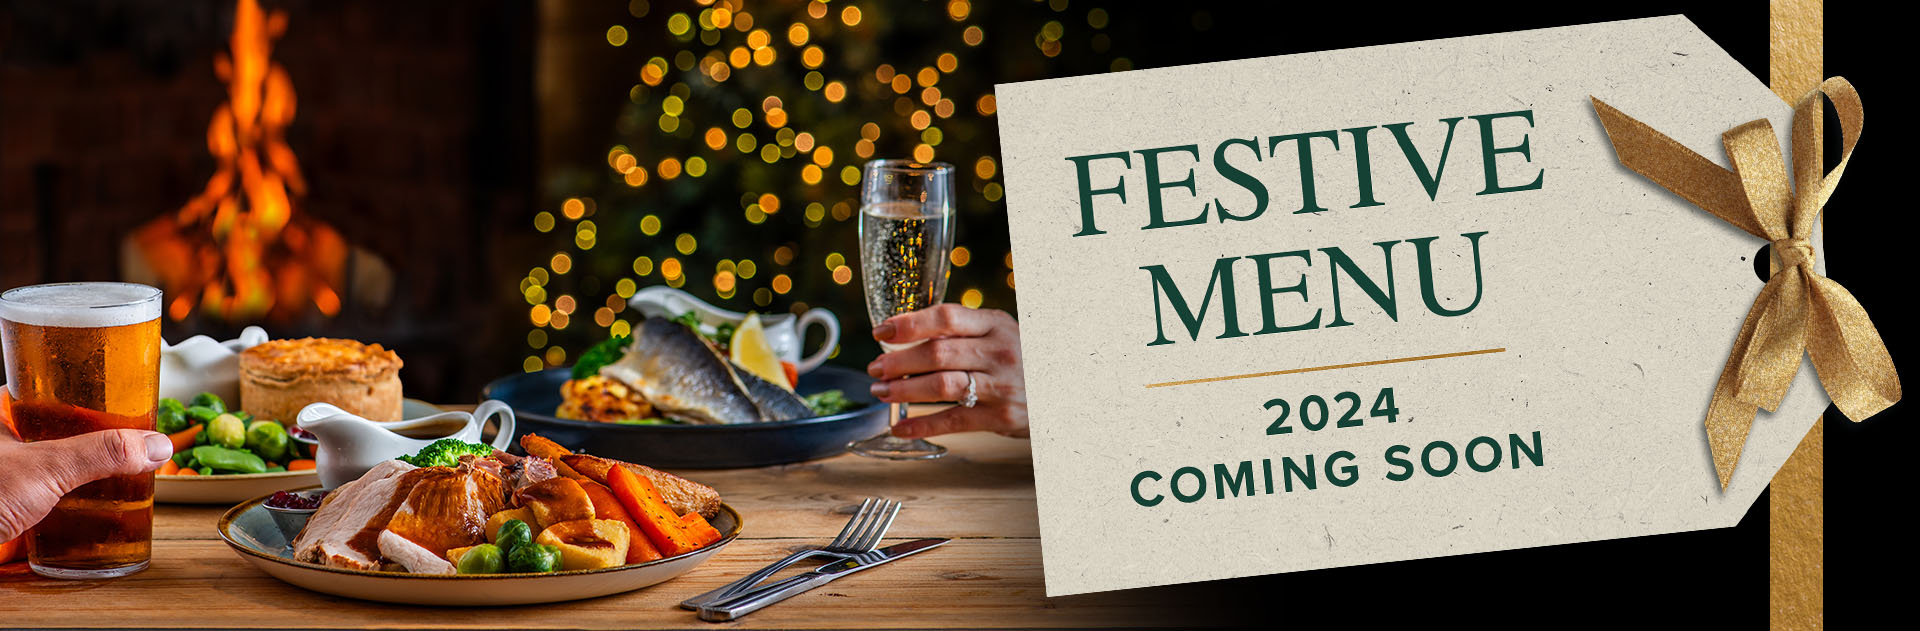 Festive Menu at The Plume of Feathers 